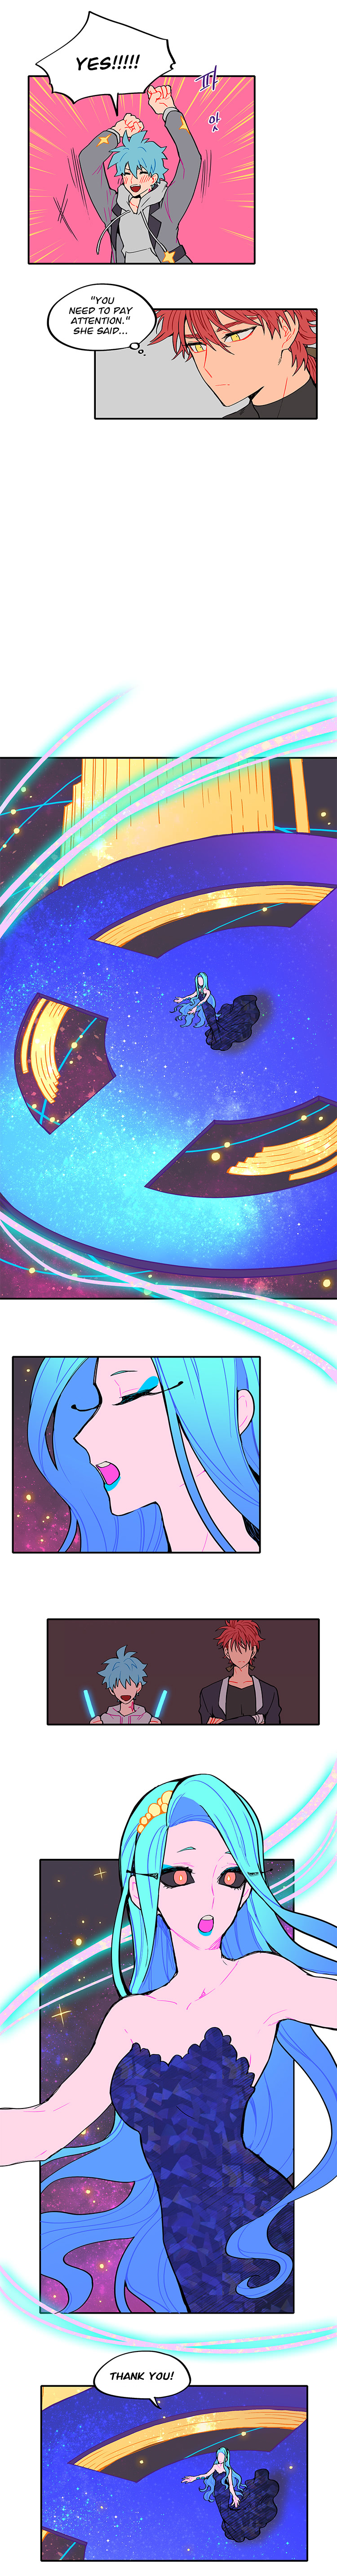 Universe And Sword - Page 2